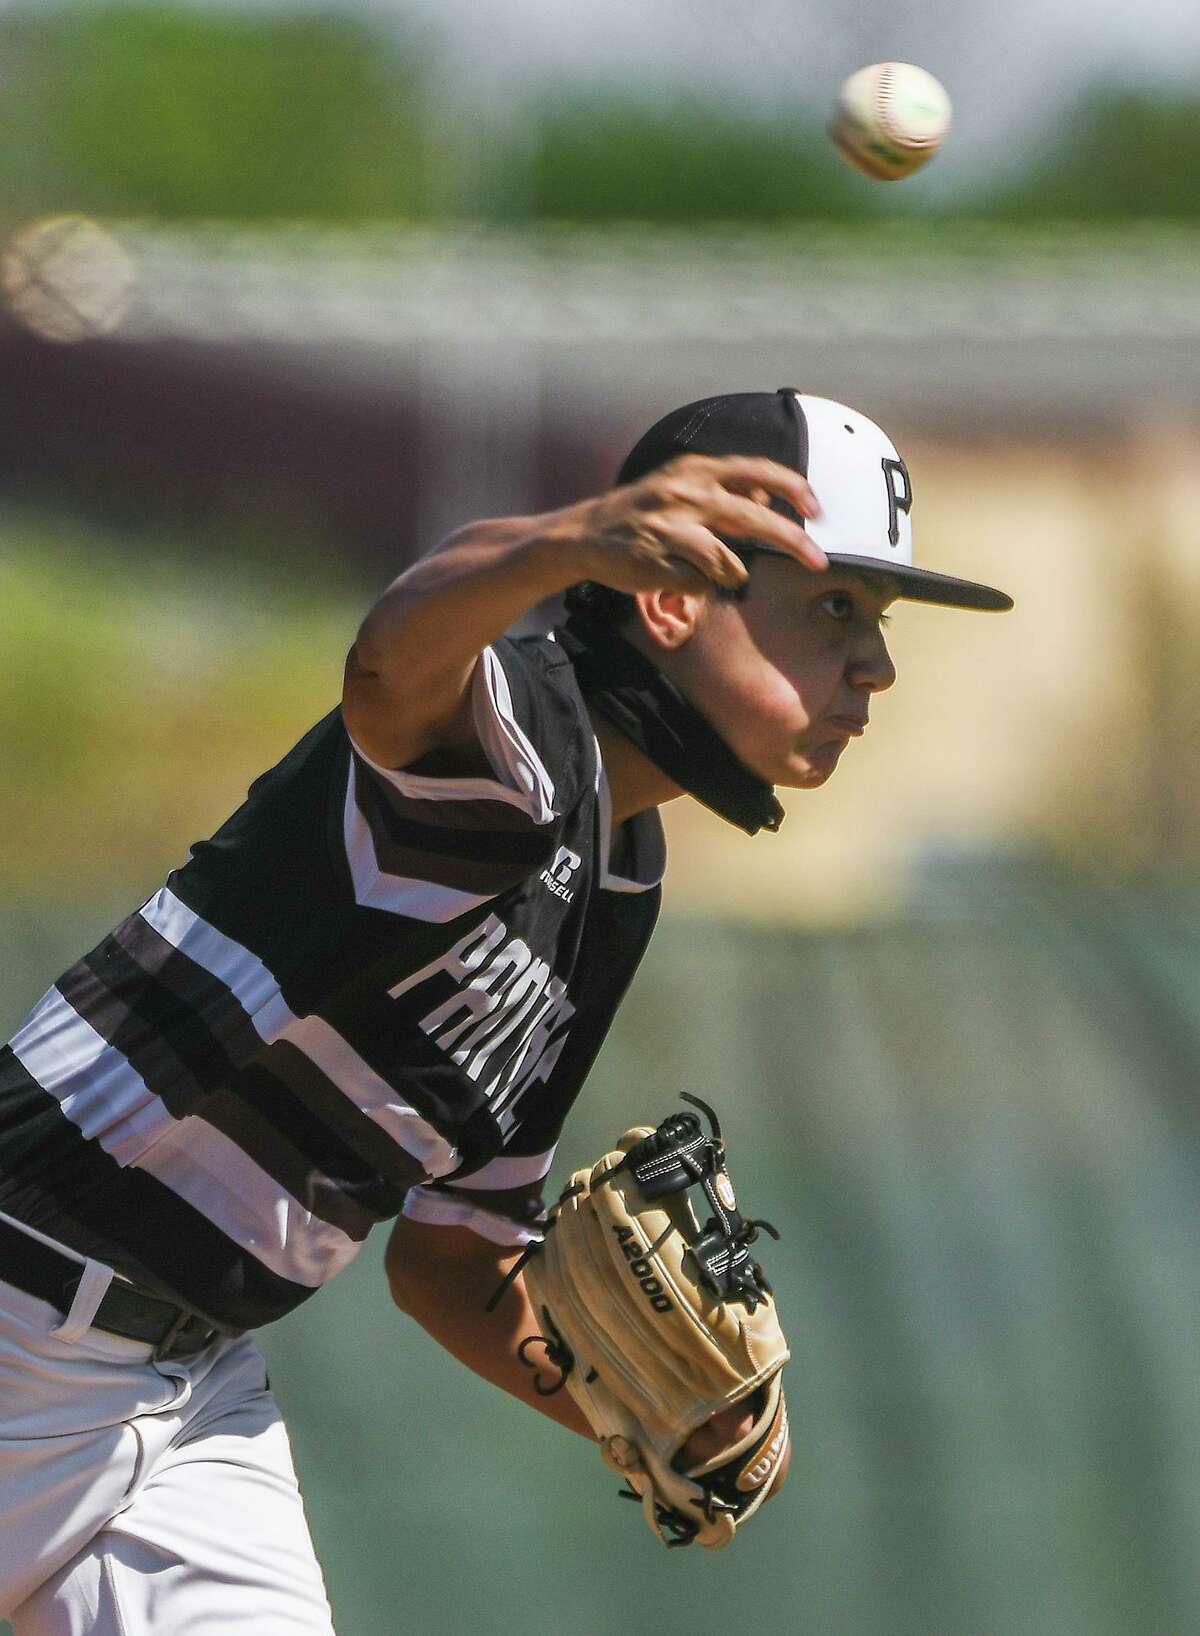 United South’s Arturo Garcia allowed just one run in six innings with five strikeouts while adding a hit, a run and an RBI at the plate in a 6-1 victory over Alexander.